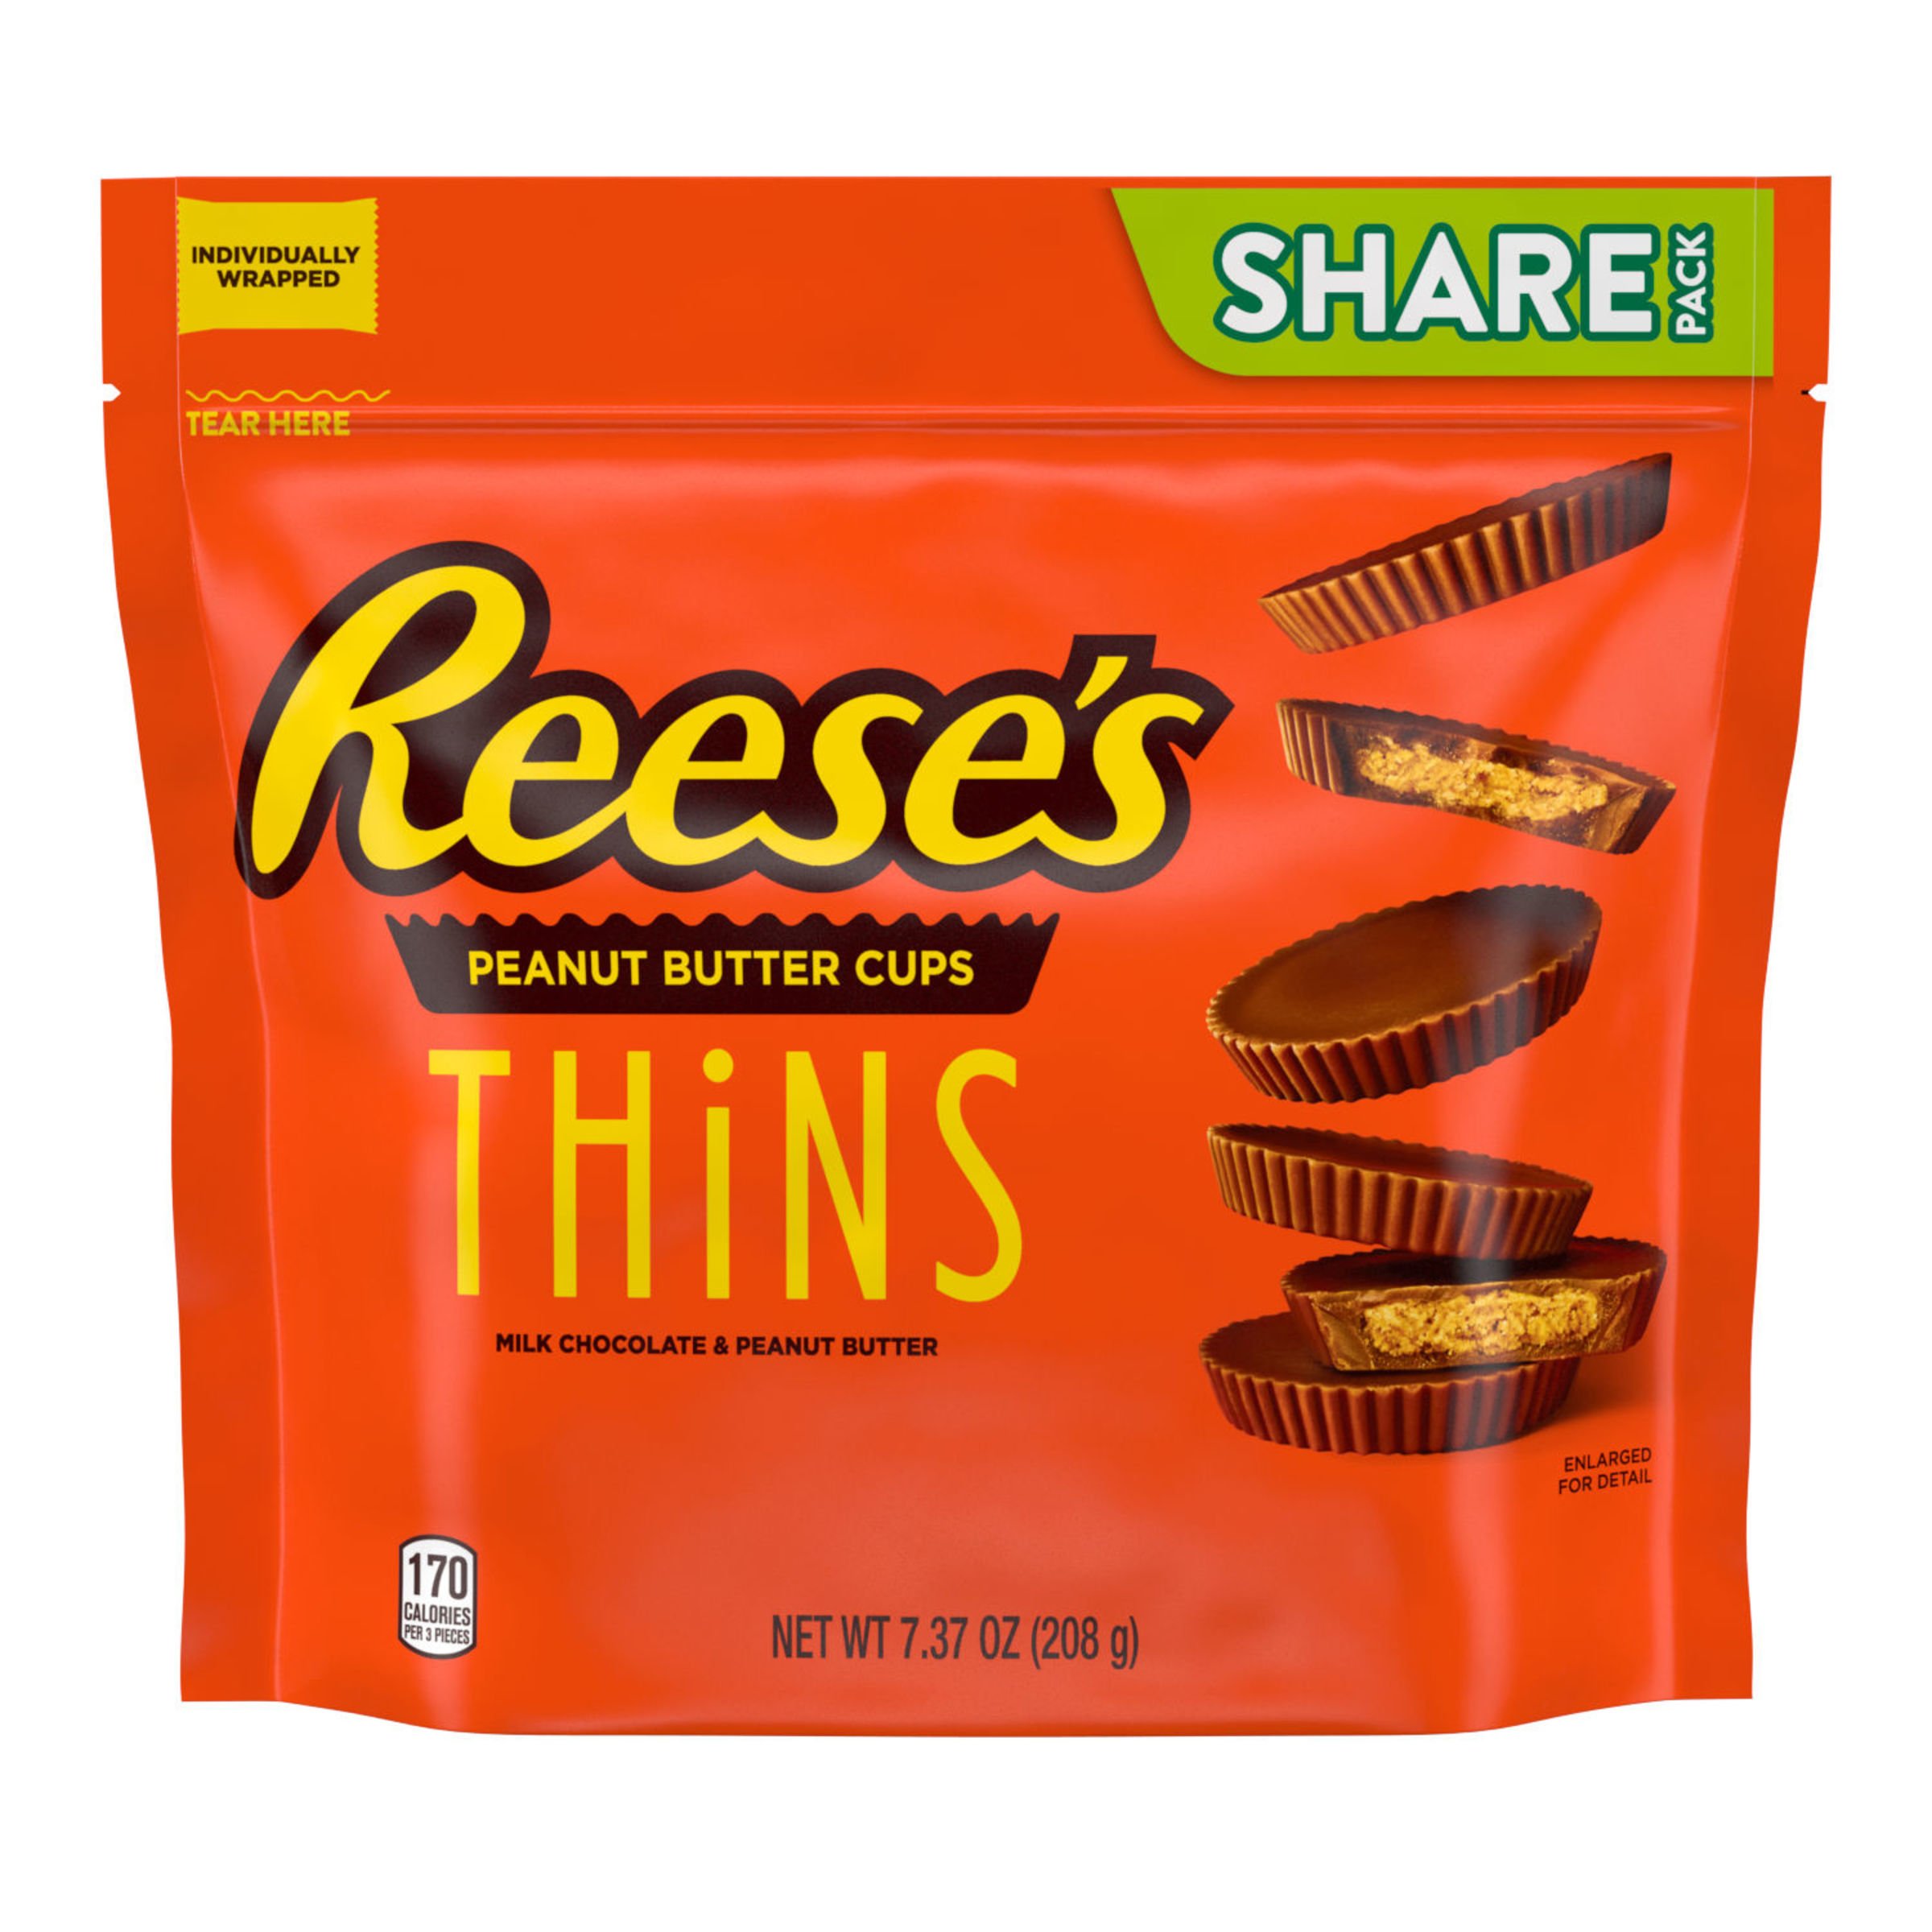 REESE'S Stuff Your Cup, peanut butter, peanut butter cup